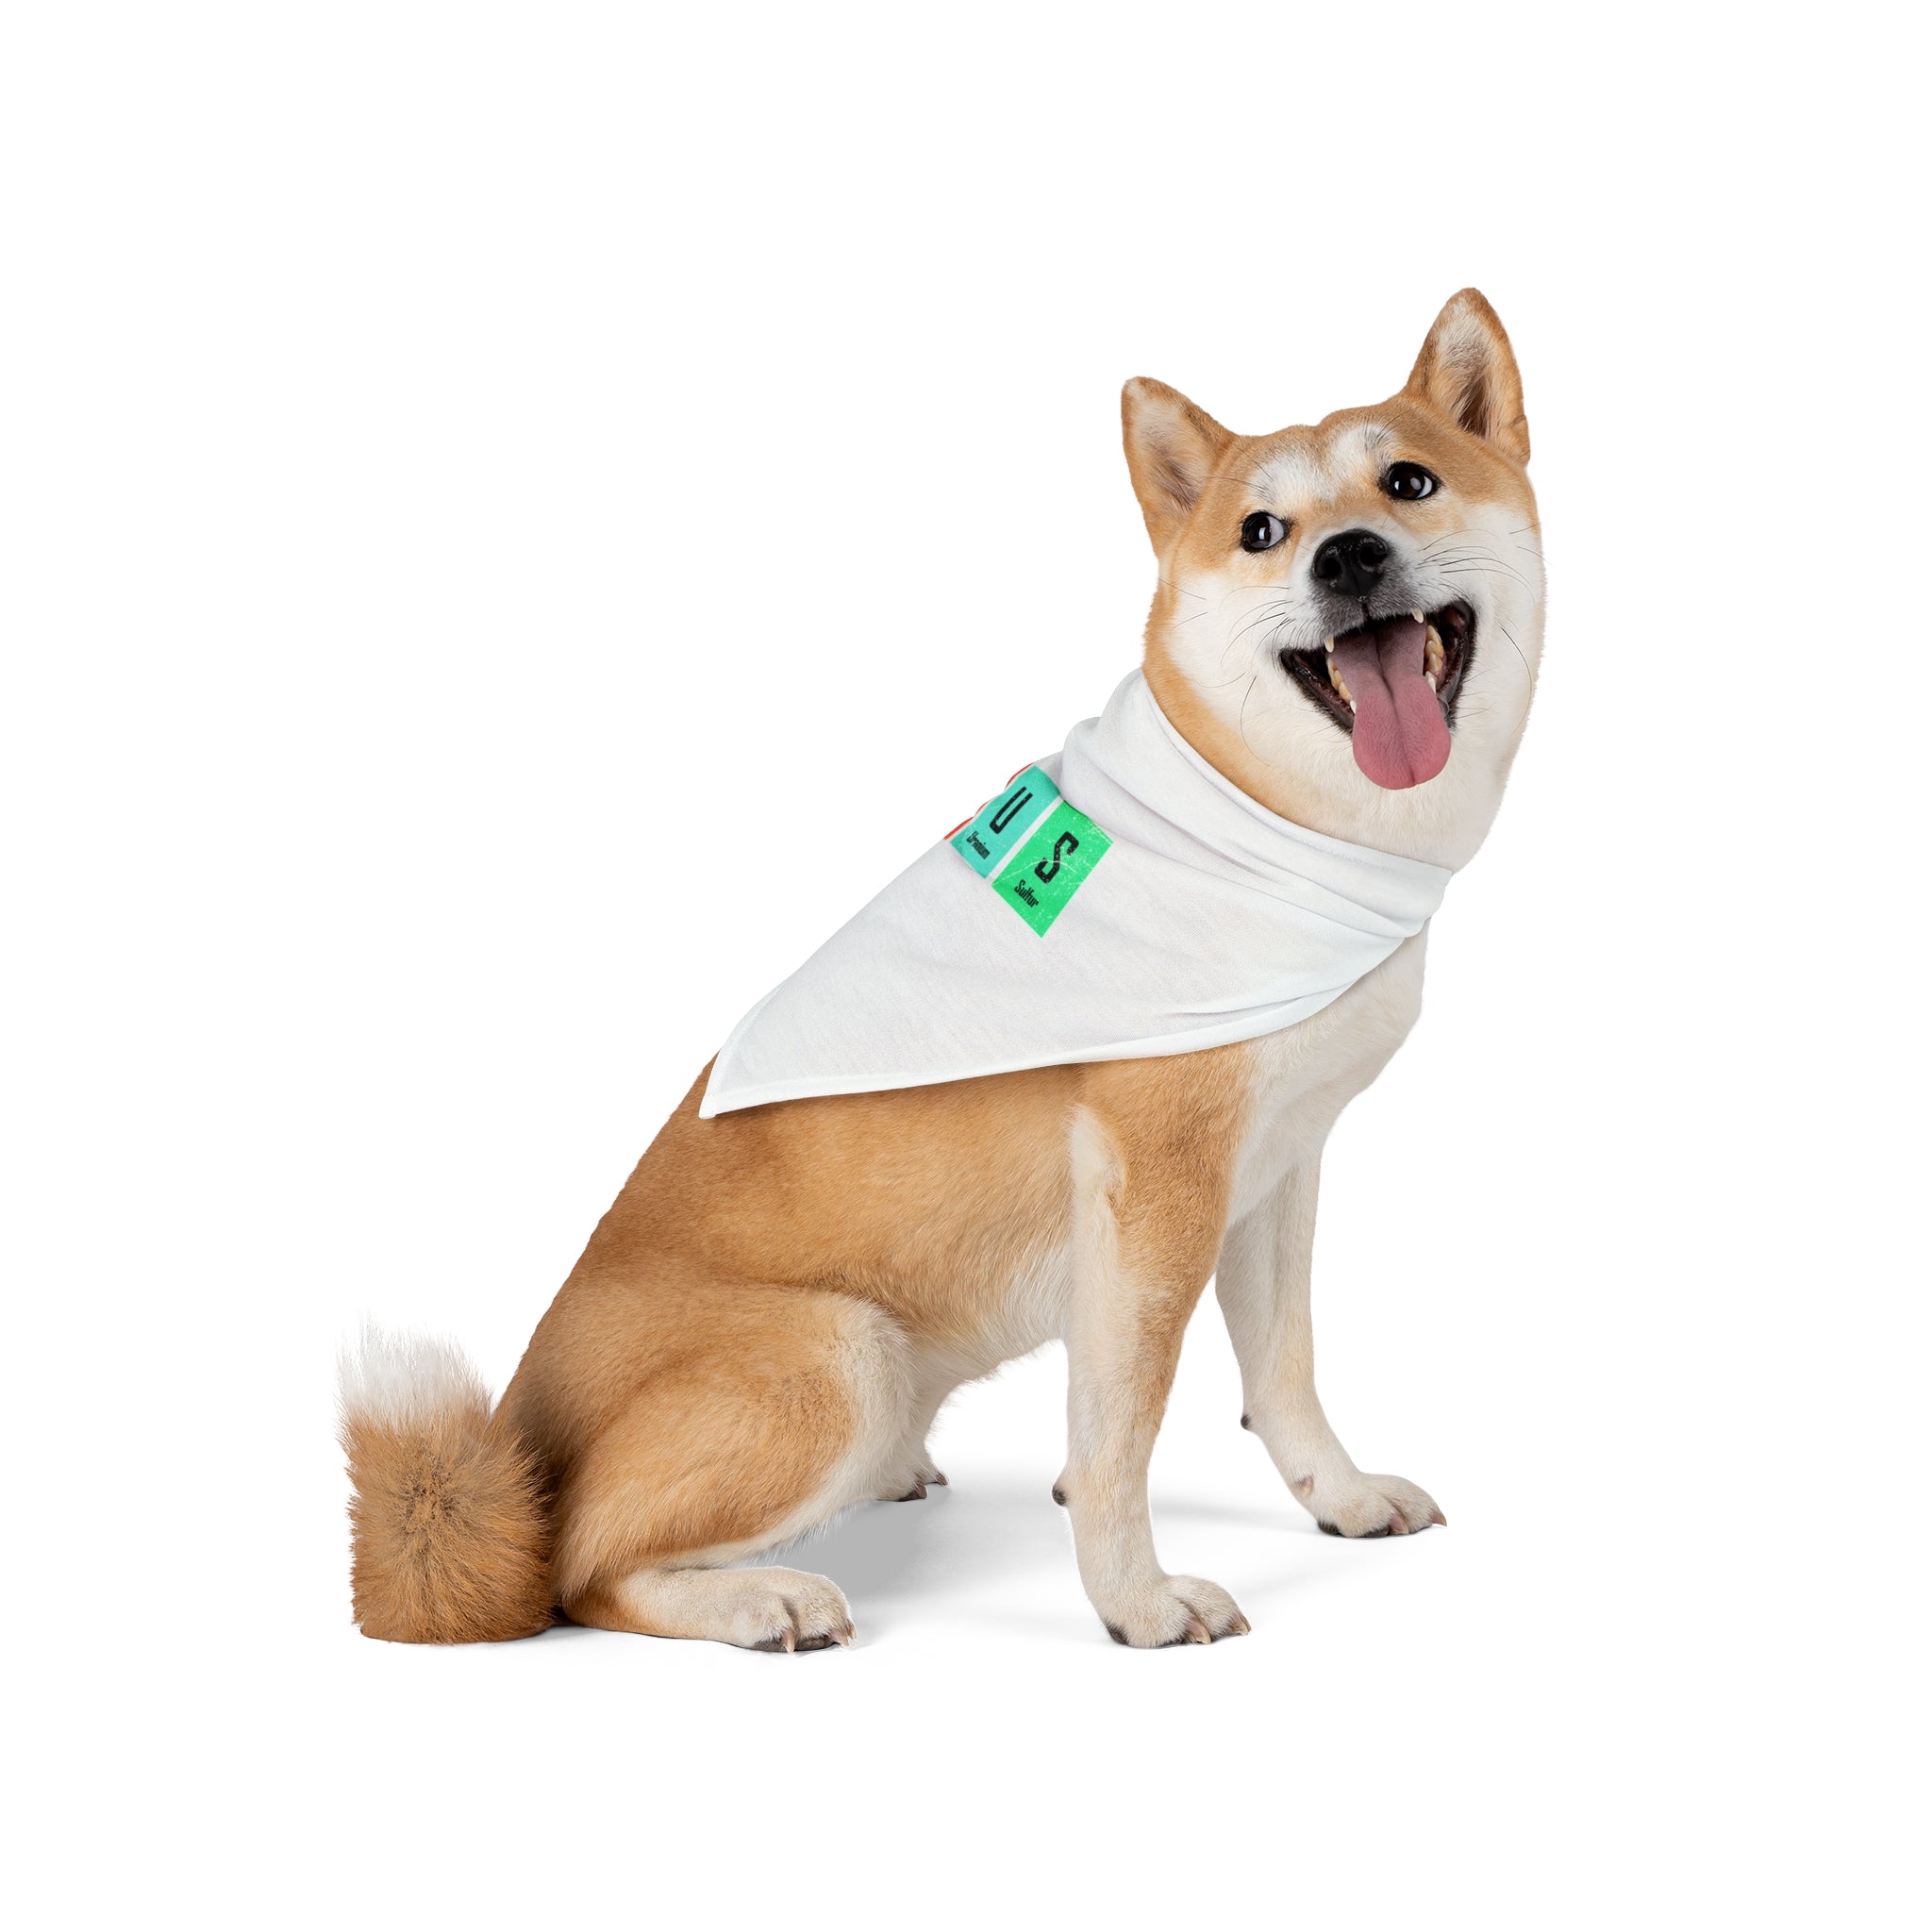 A Shiba Inu dog sits facing slightly to the side, wearing a white polyester Ge-Ni-U-S - Pet Bandana adorned with a green design, and has its tongue out. Perfect for design-loving pets!